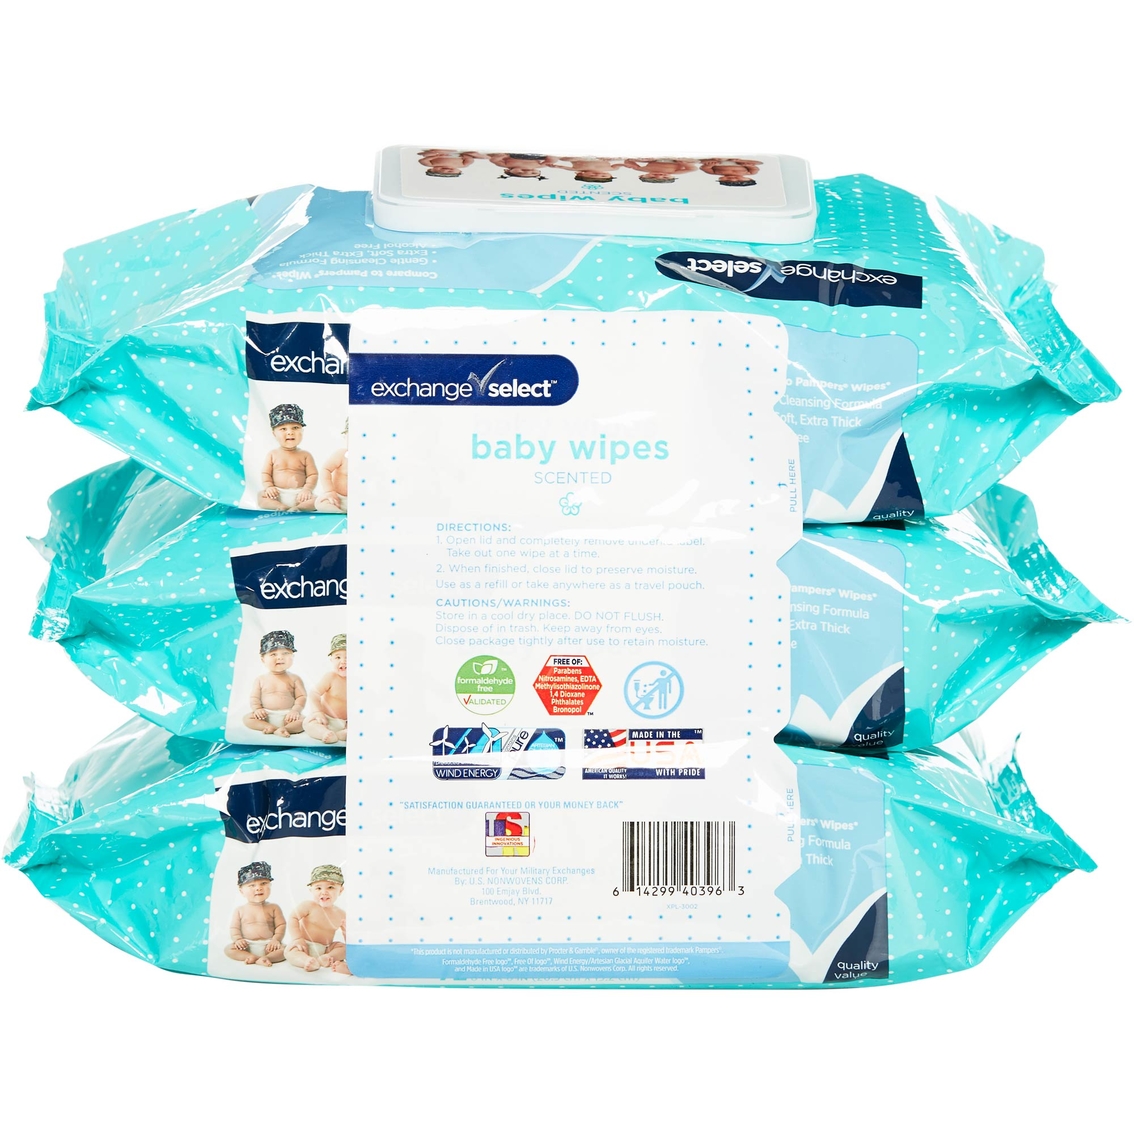 Exchange Select Scented Solo Dispensing Baby Wipes, 216 ct. - Image 3 of 3